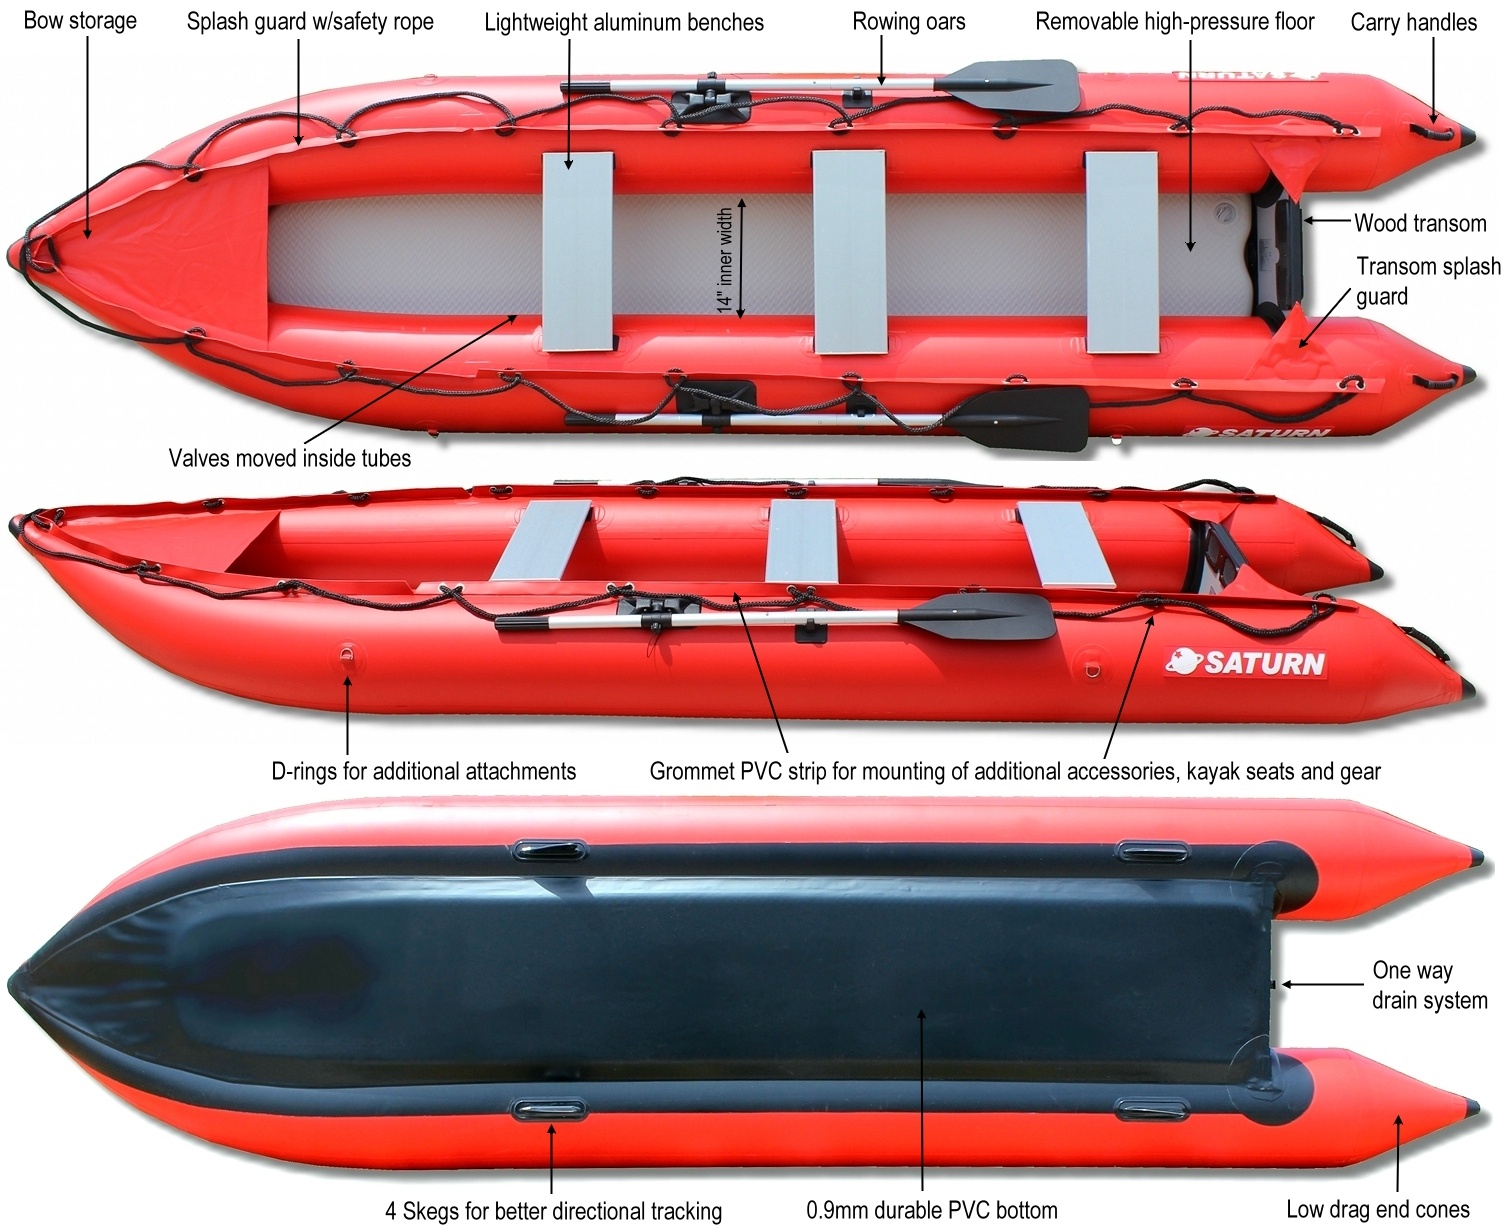 14' inflatable Kayak &amp; inflatable Boat crossover - KaBoat SK430.